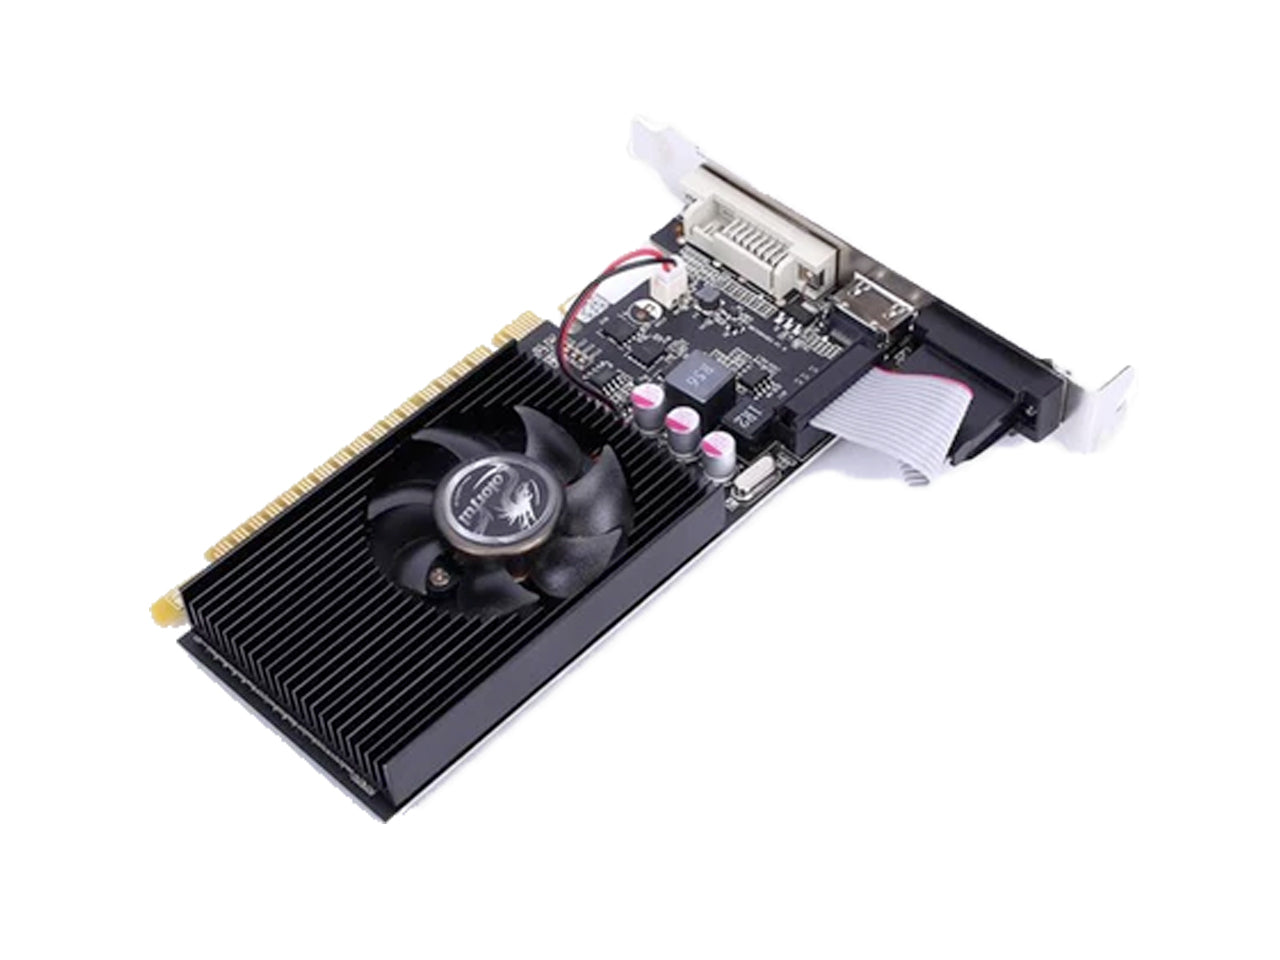 Colorful GeForce GT710-2GD3